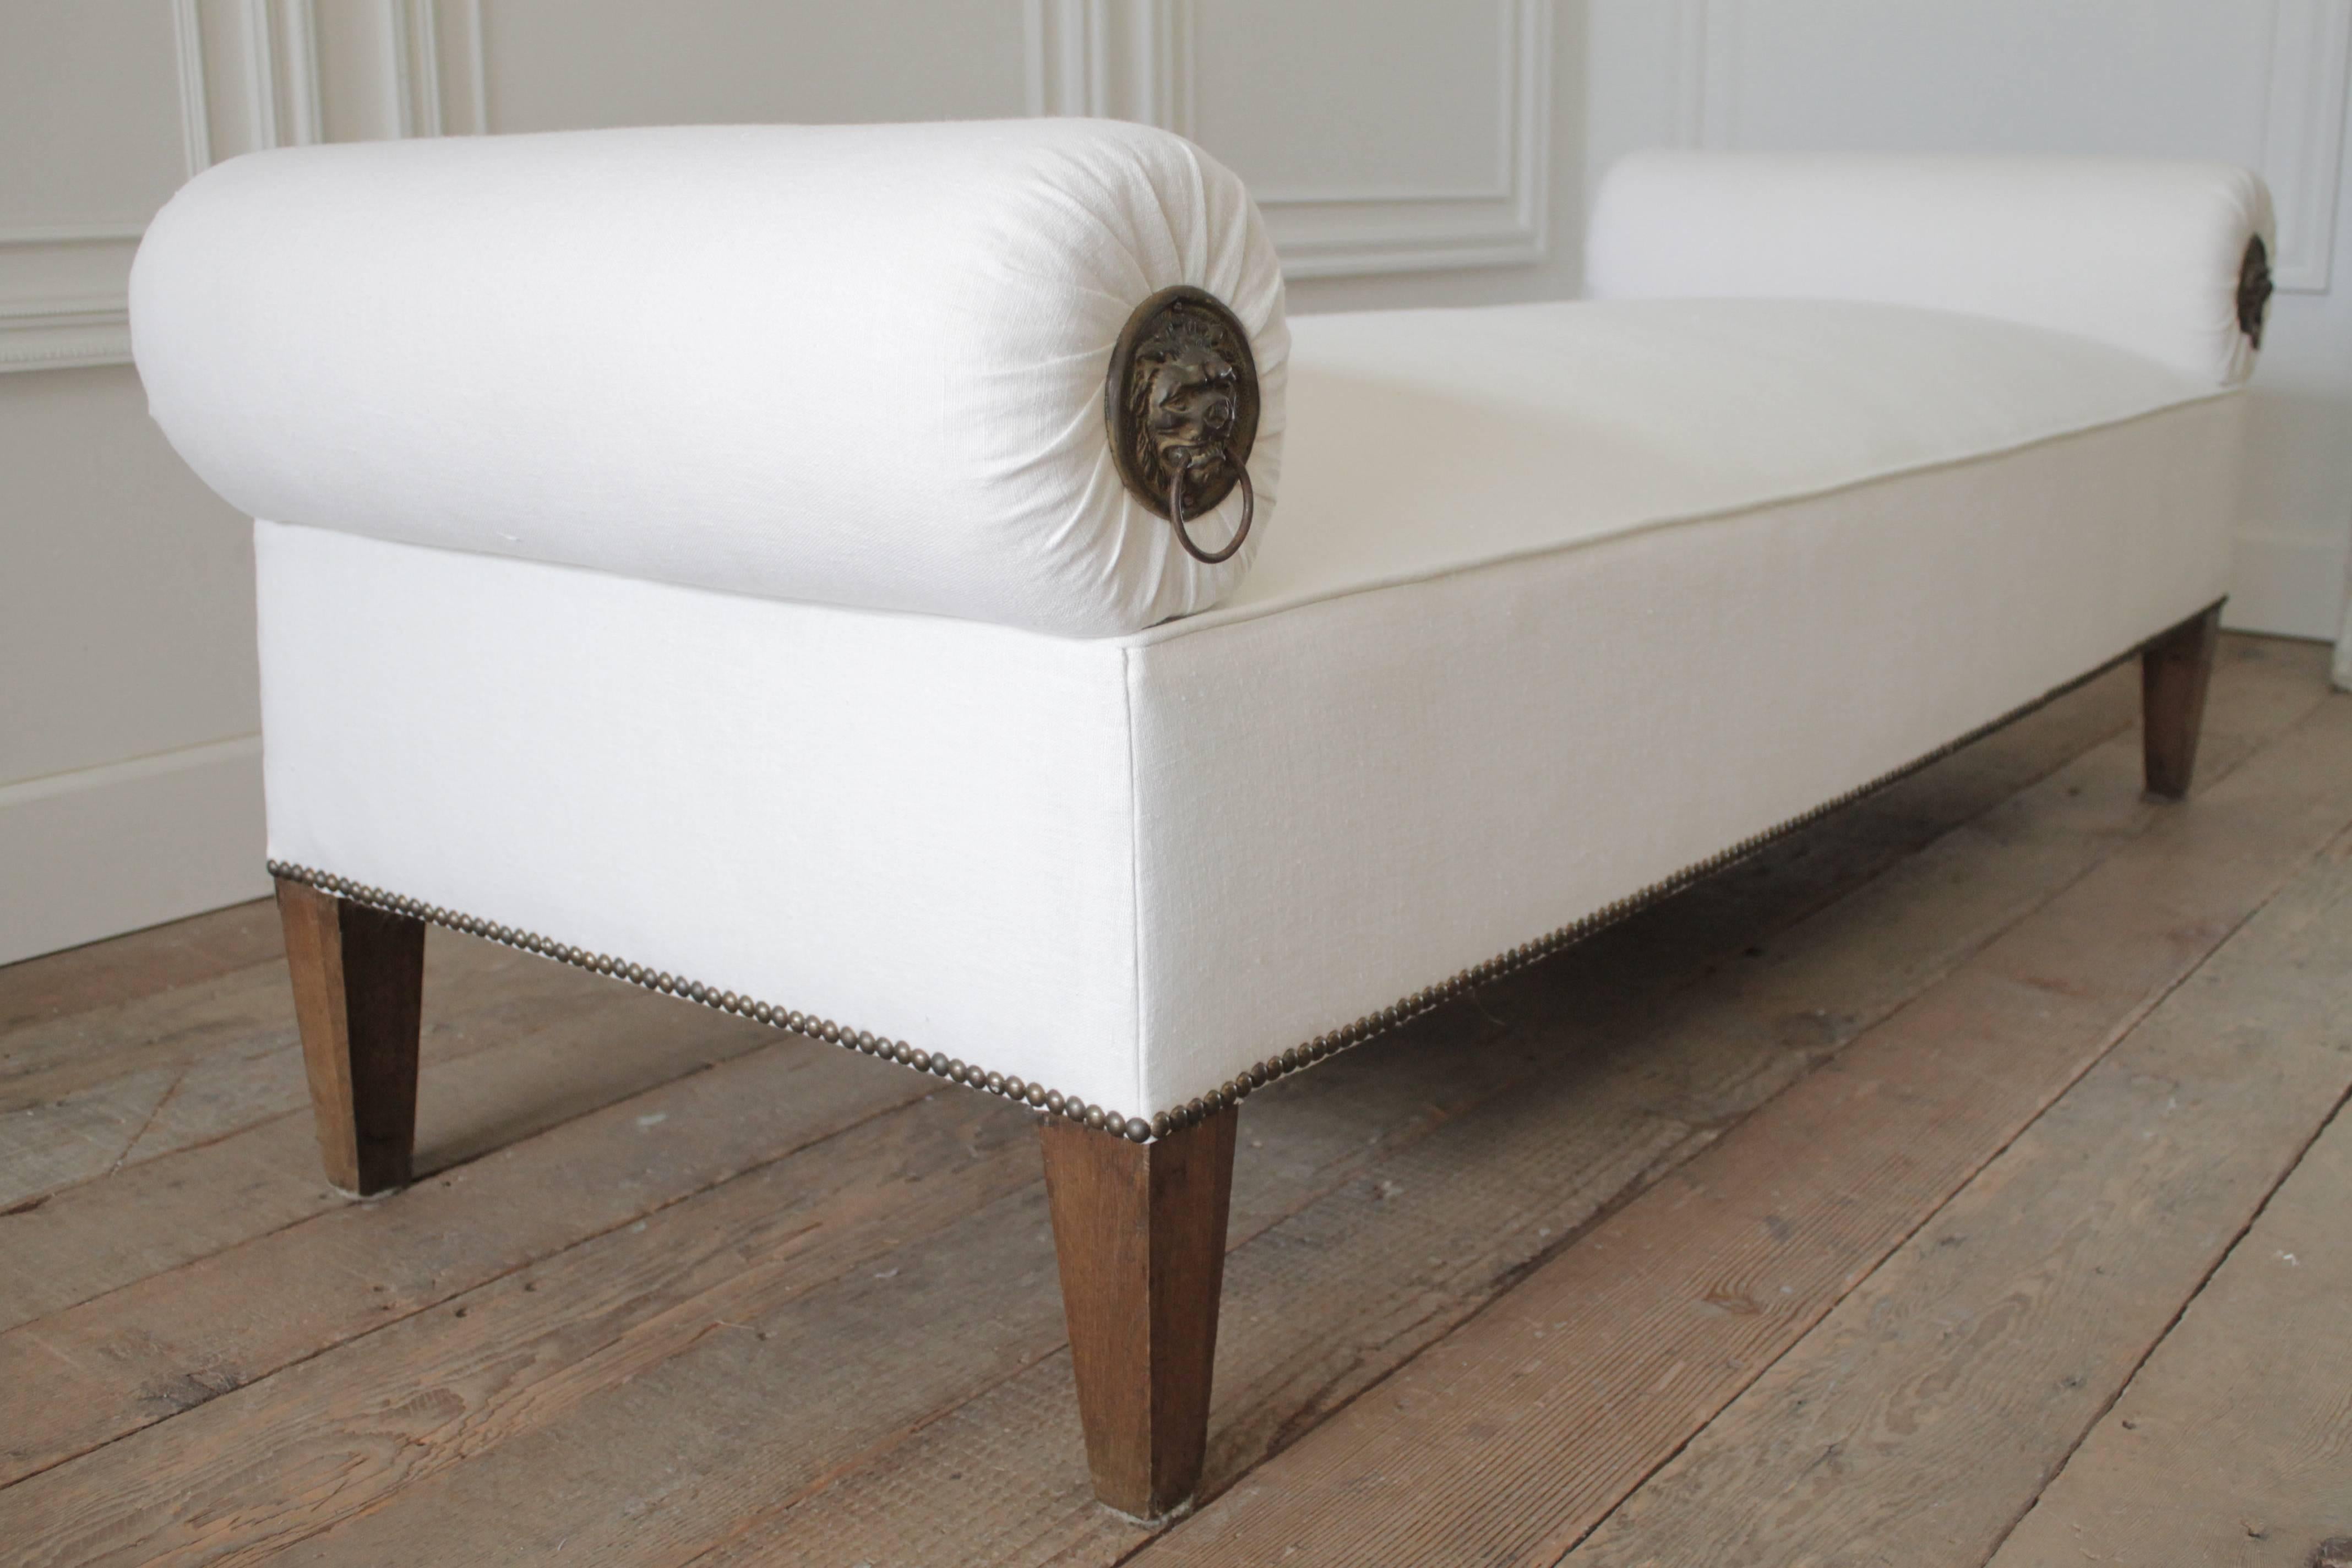 Beautiful custom designed bench with solid oak legs and antique brass nailhead trim. We reupholstered this in a soft white heavy weight Irish linen. The round bolsters feature lions head knocker hardware on one side. These bolsters are removable for